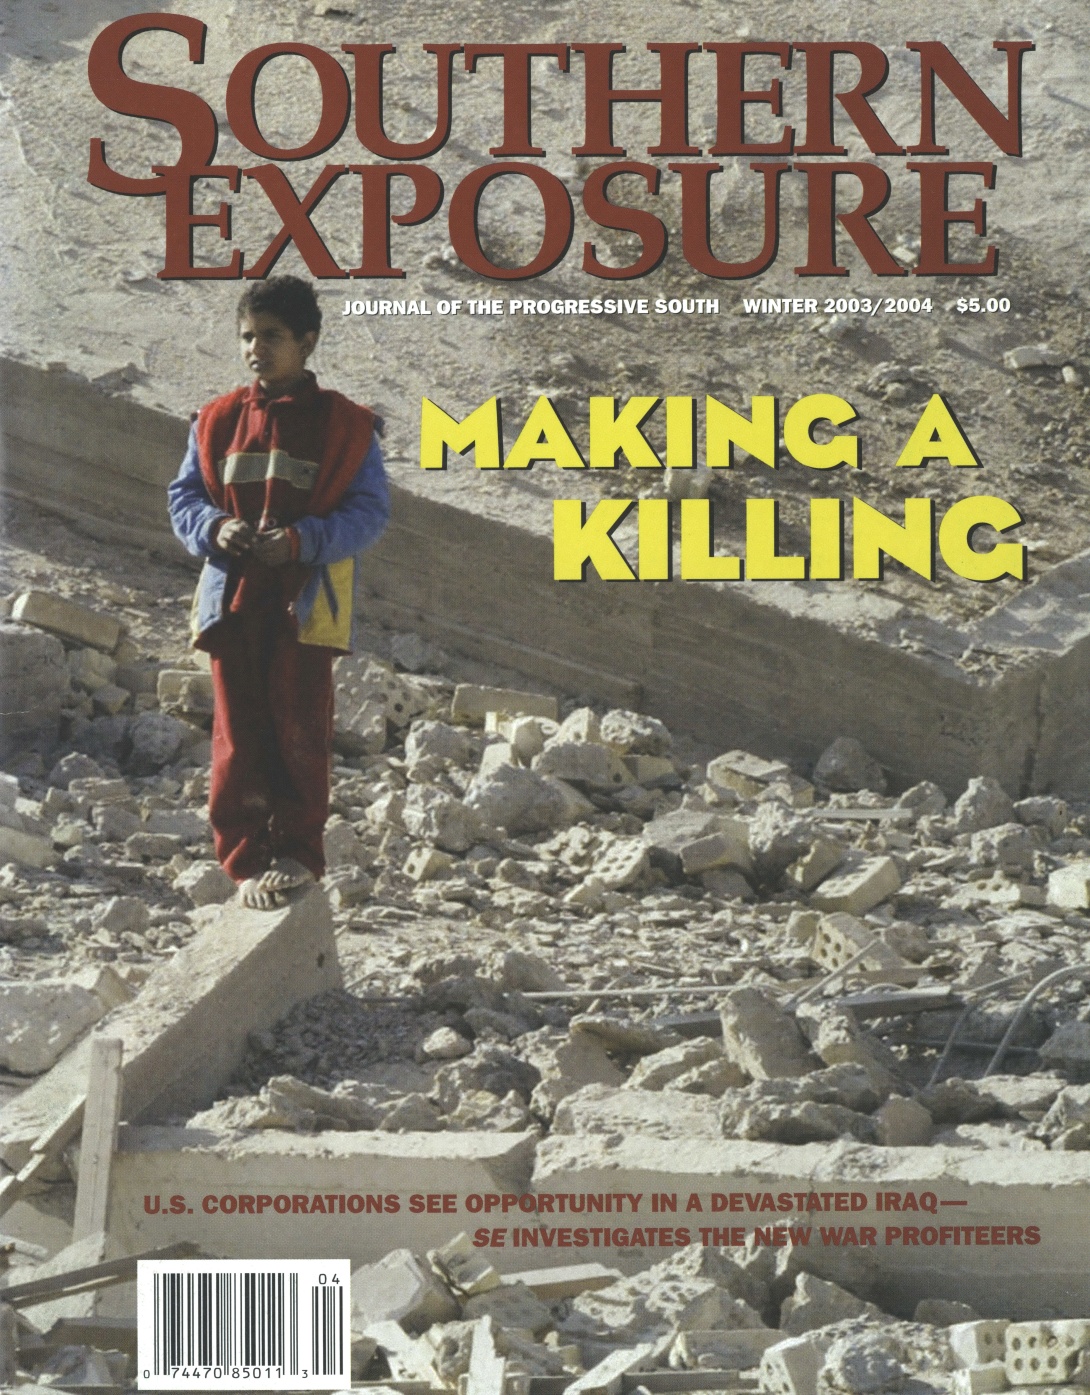 Magazine cover with photo of child standing on top of rubble. Text reads "Making a Killing: U.S. corporations see opportunity in a devastated Iraq—SE investigates the new war profiteers." 